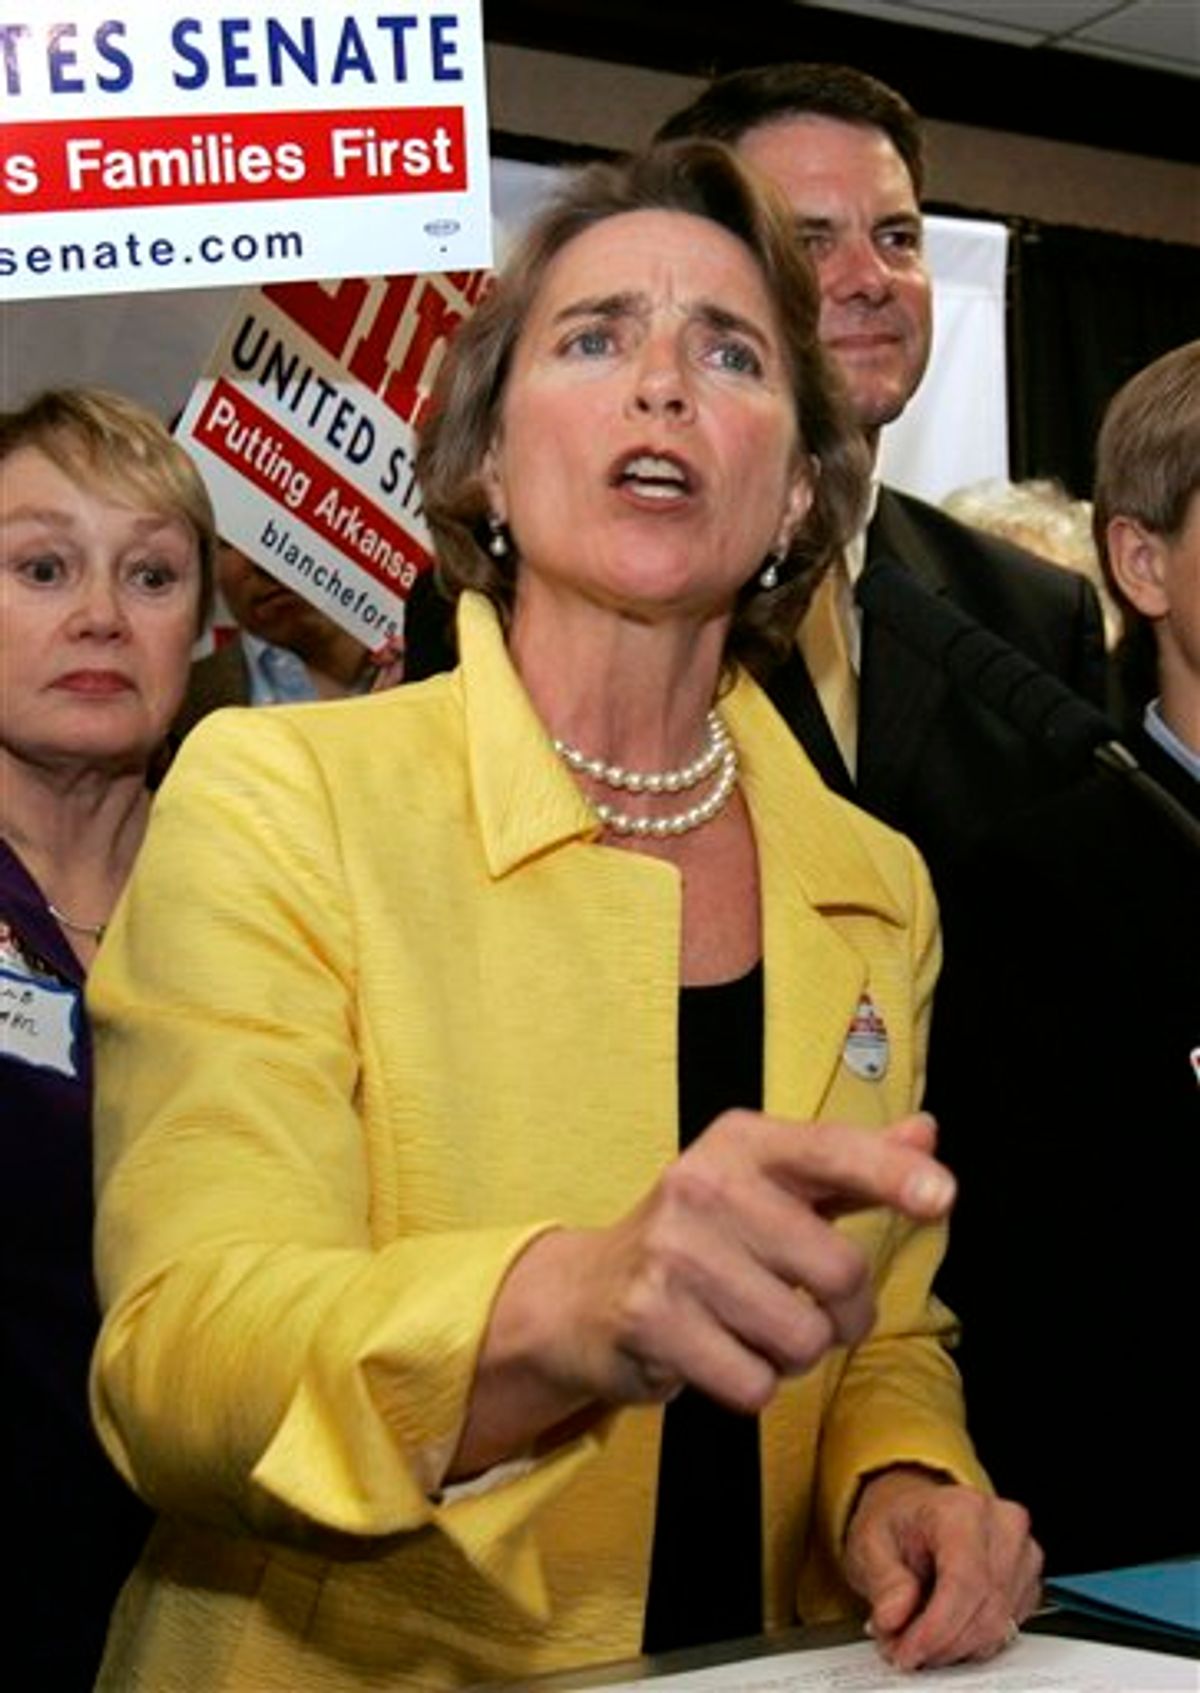 Sen. Blanche Lincoln, D-Ark., speaks to supporters at her election night party in Little Rock, Ark., Tuesday, May 18, 2010. (AP Photo/Danny Johnston) (AP)